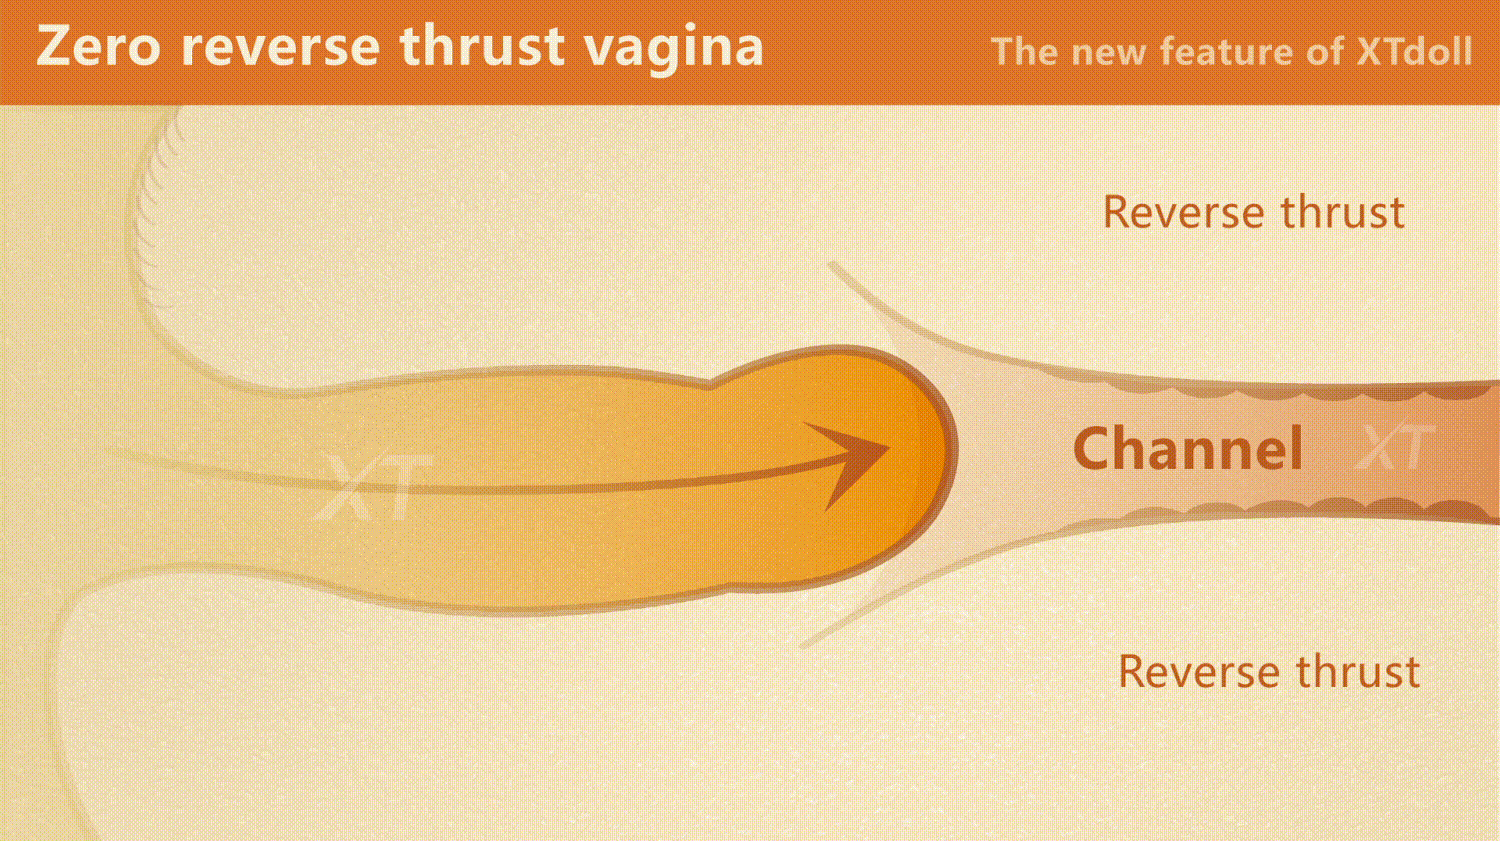 by-the-strong-thrust-of-the-vagina